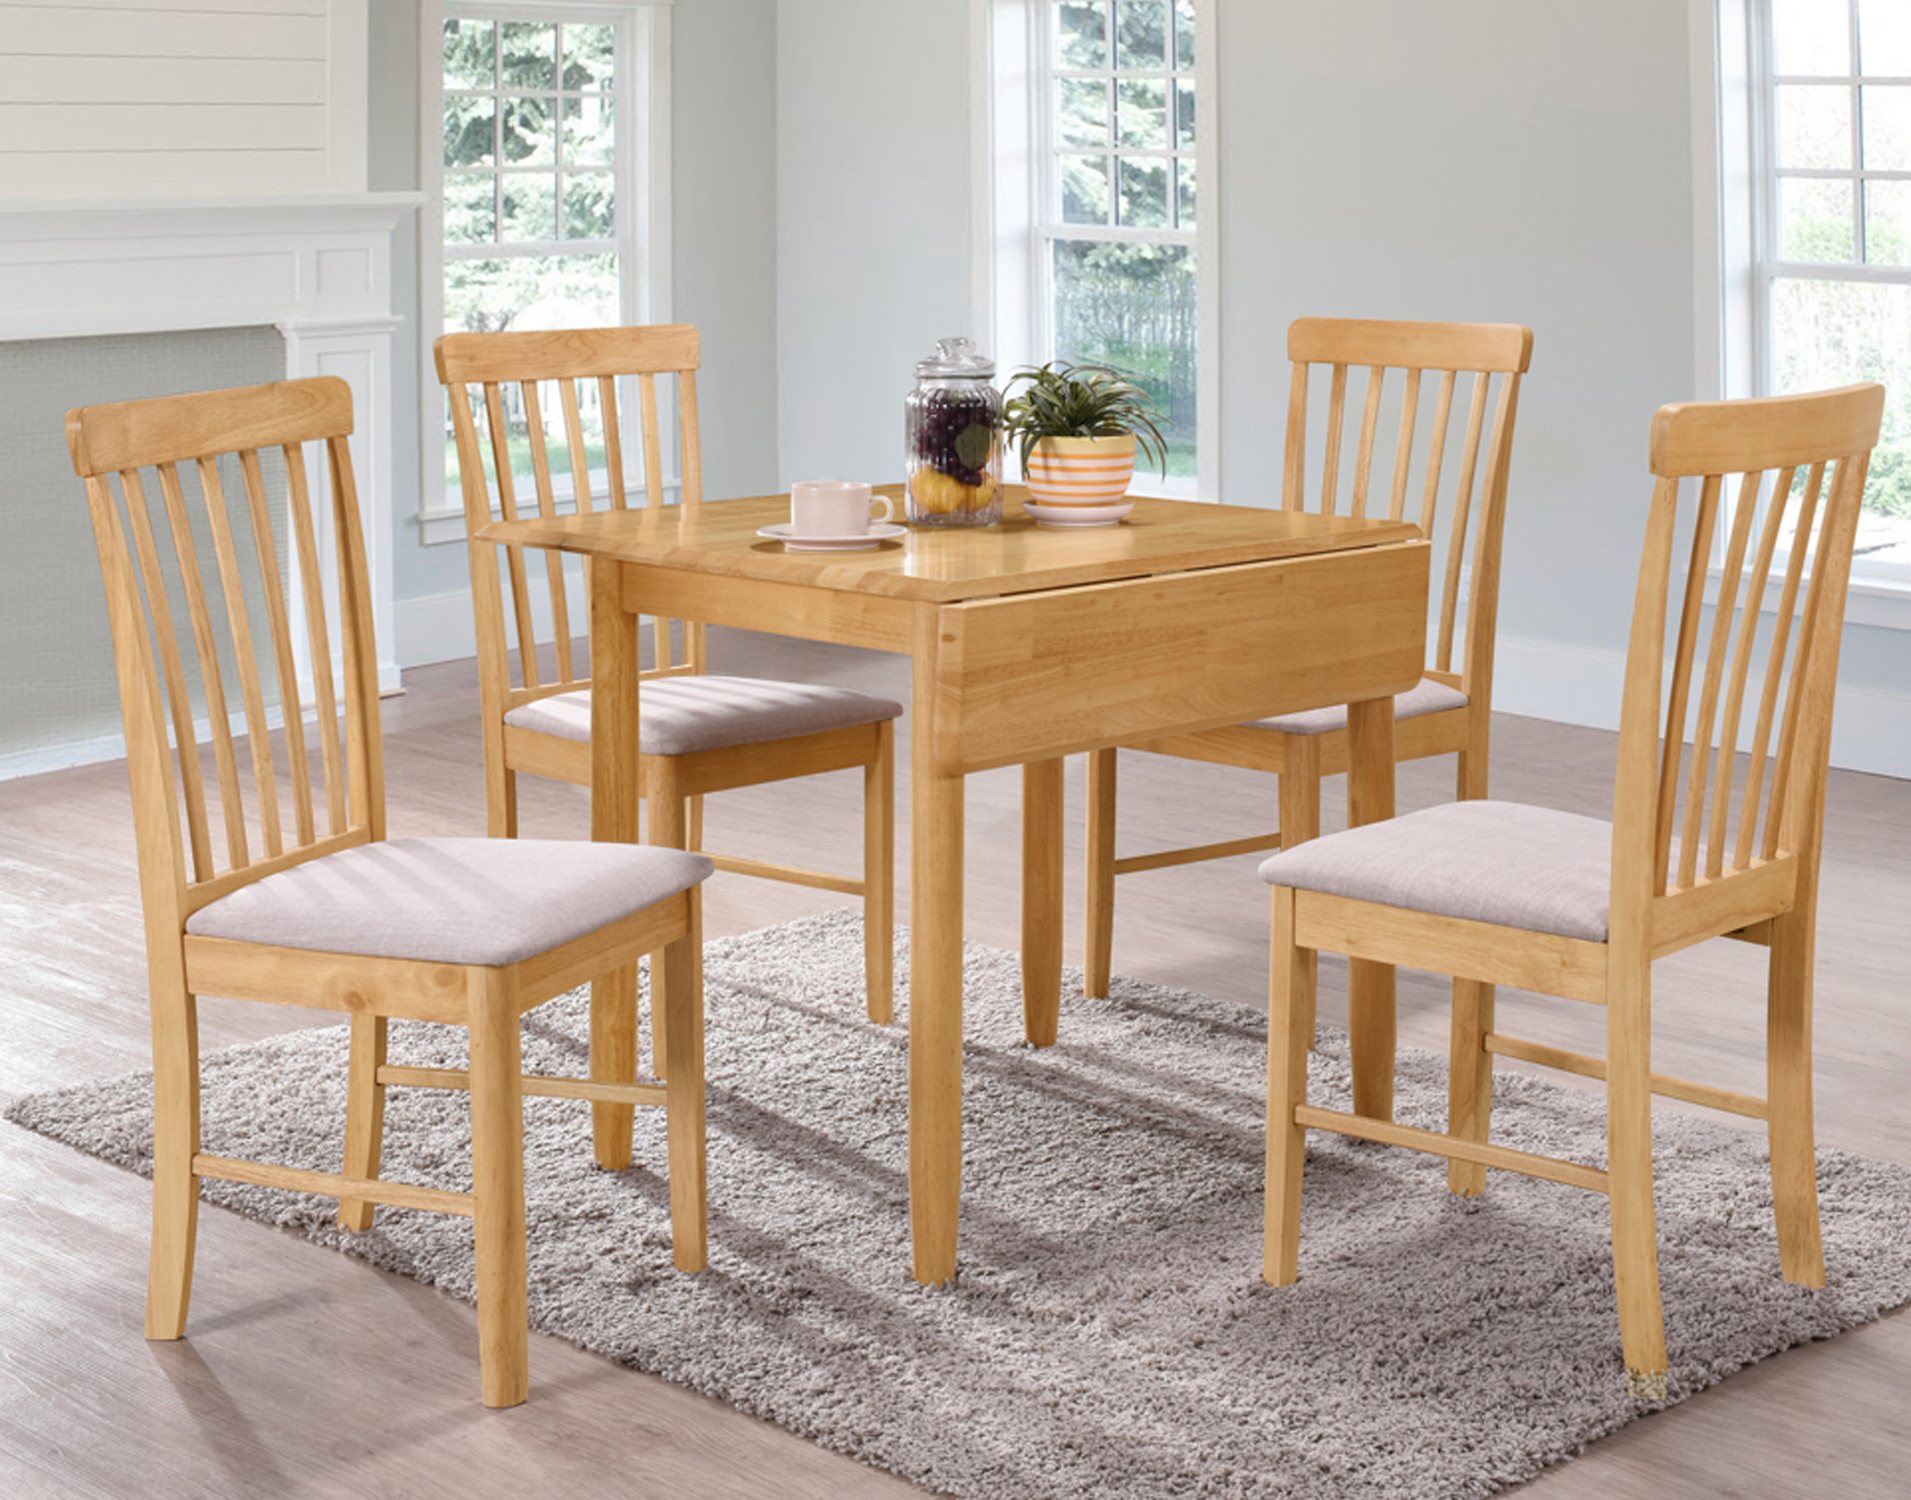 kitchen table for 2 with chair